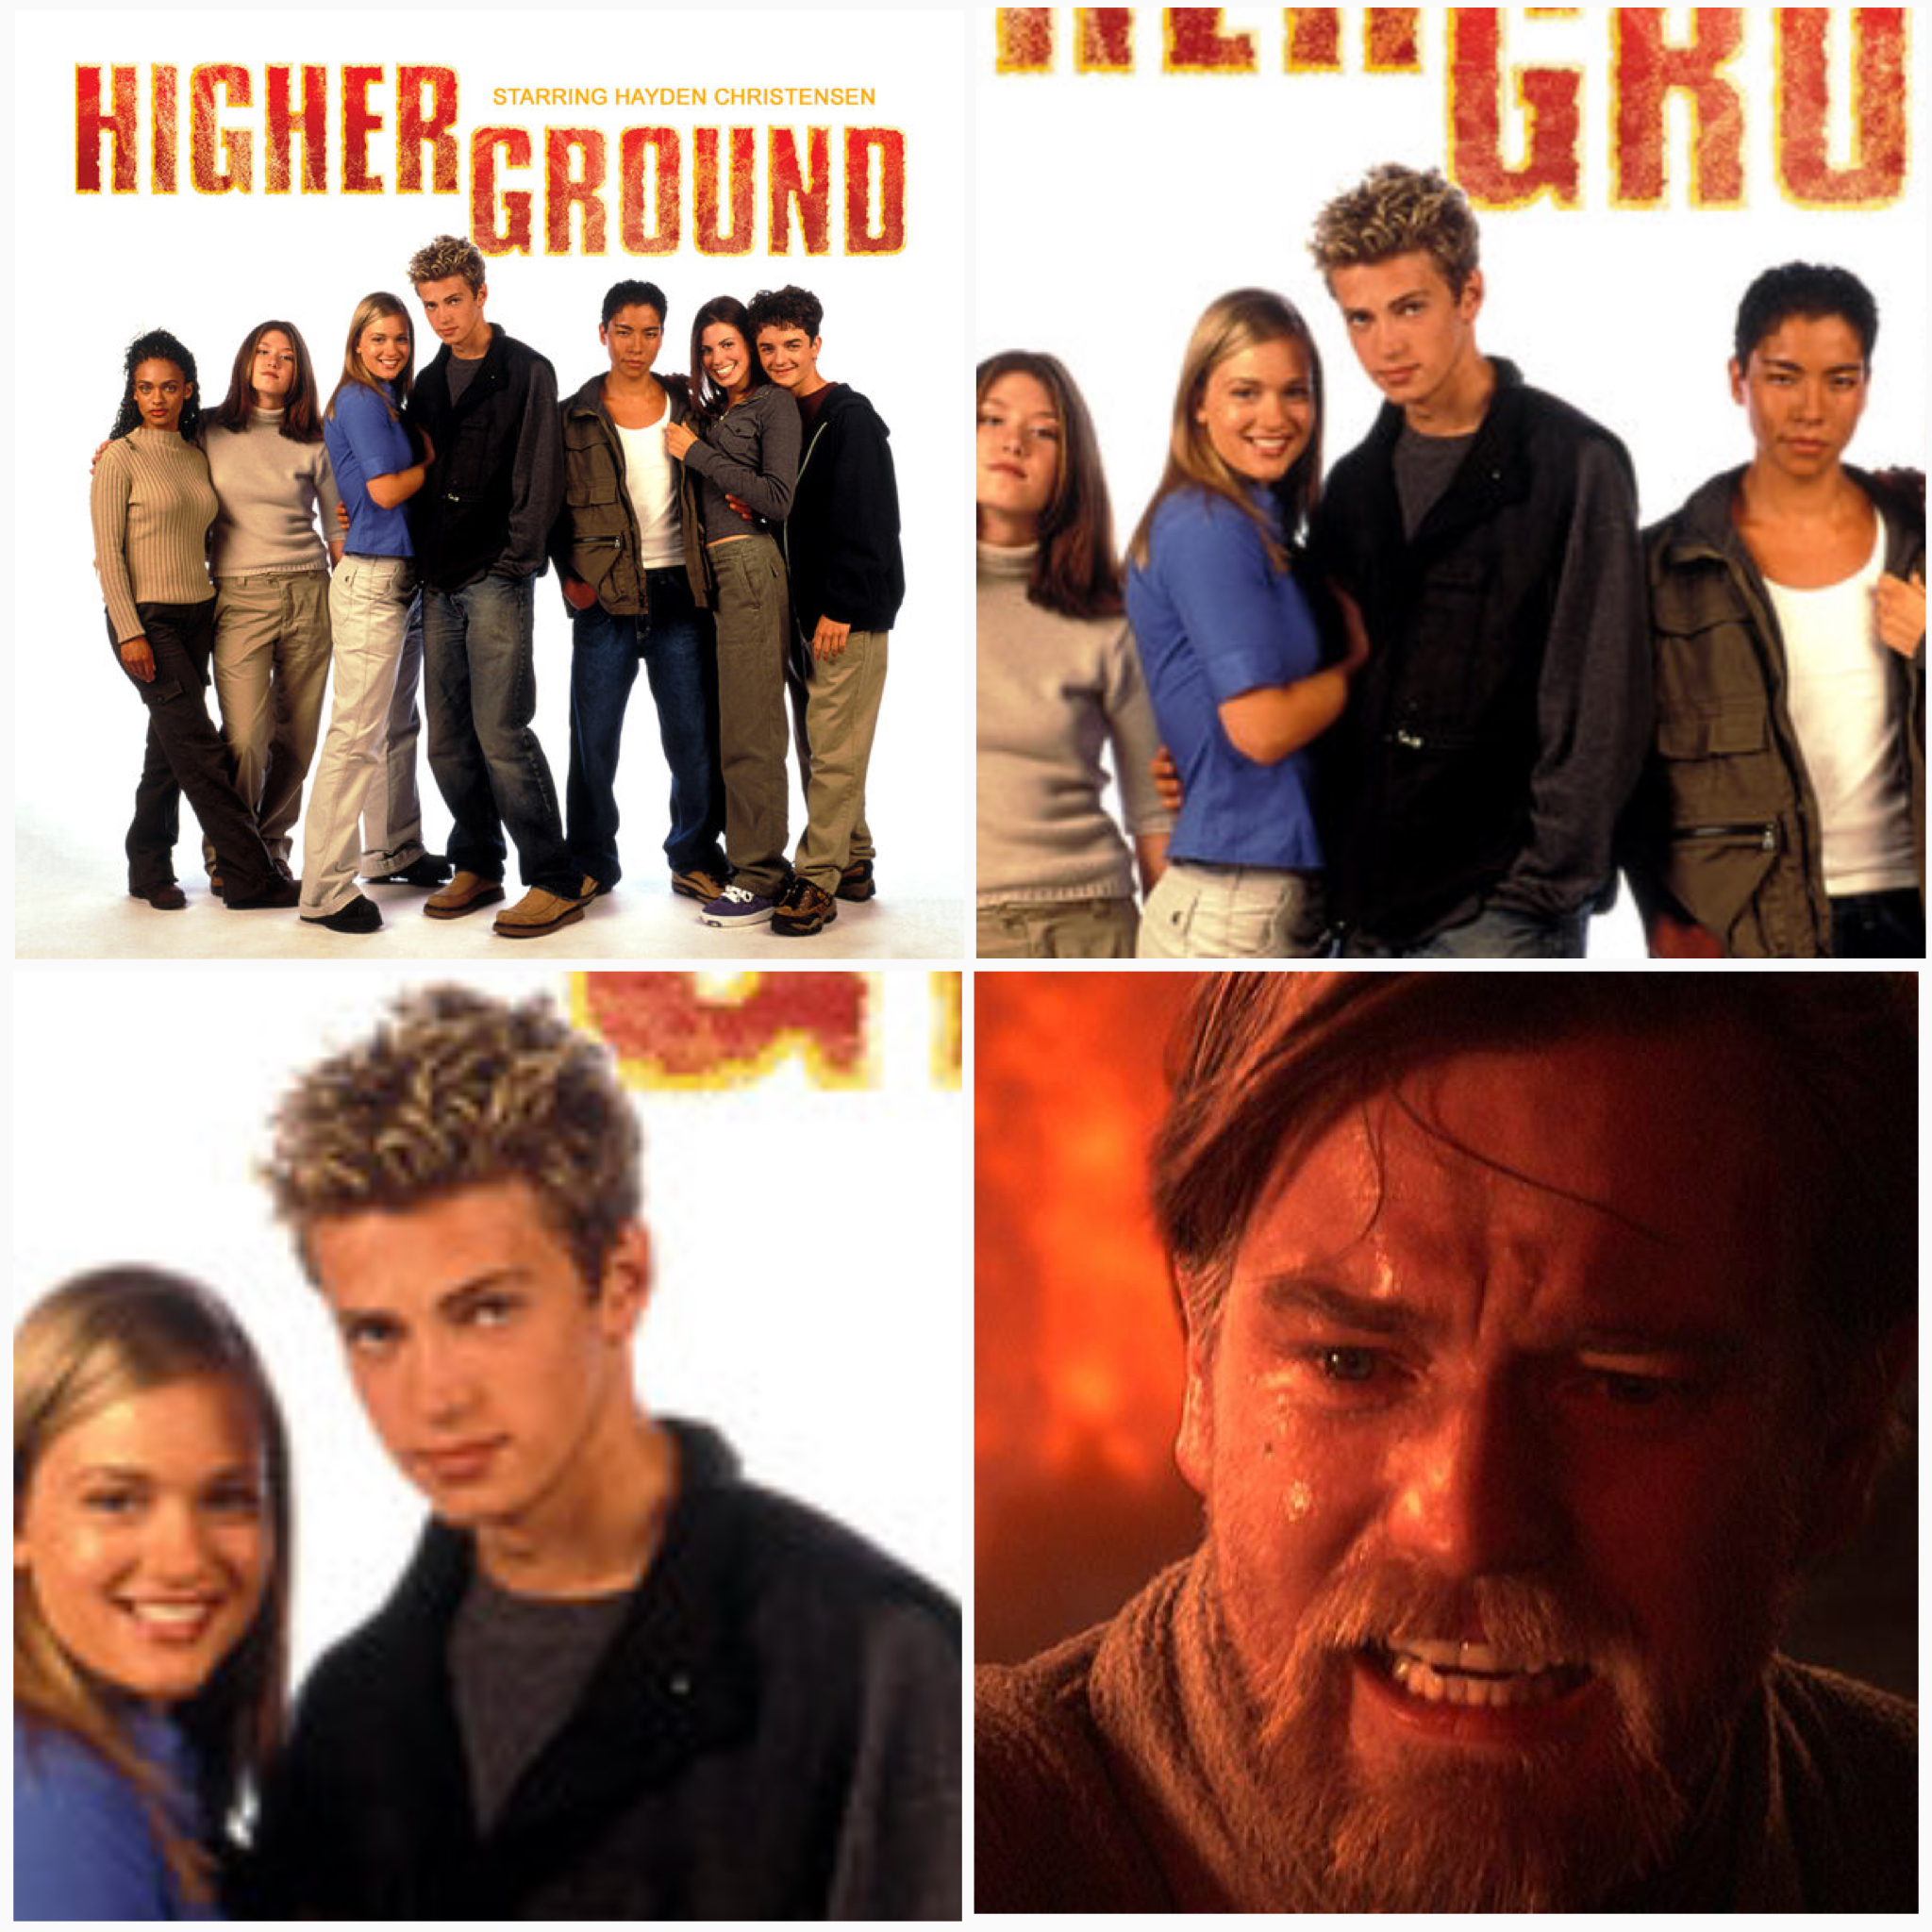 Meme of Higher Ground and that kid who played Darth Vader is in it